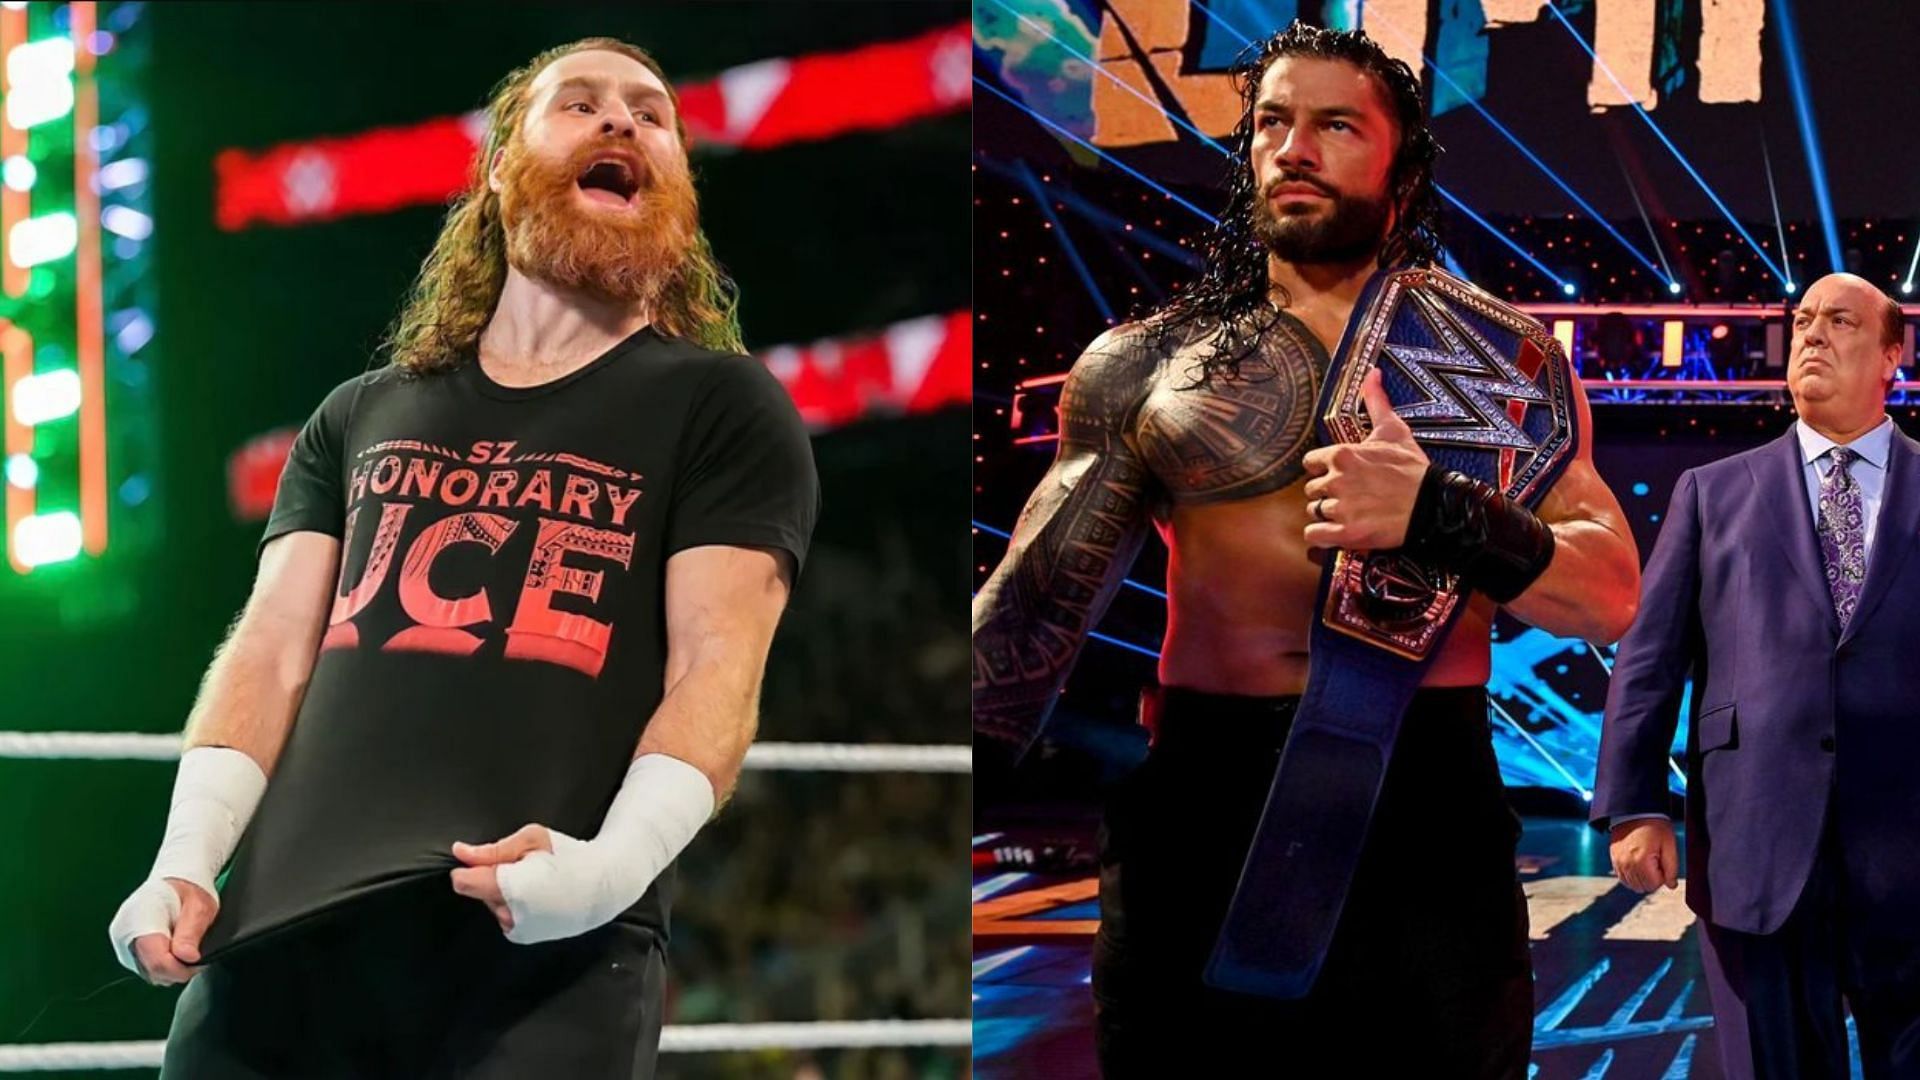 Sami Zayn has been a part of The Bloodline in WWE for several months